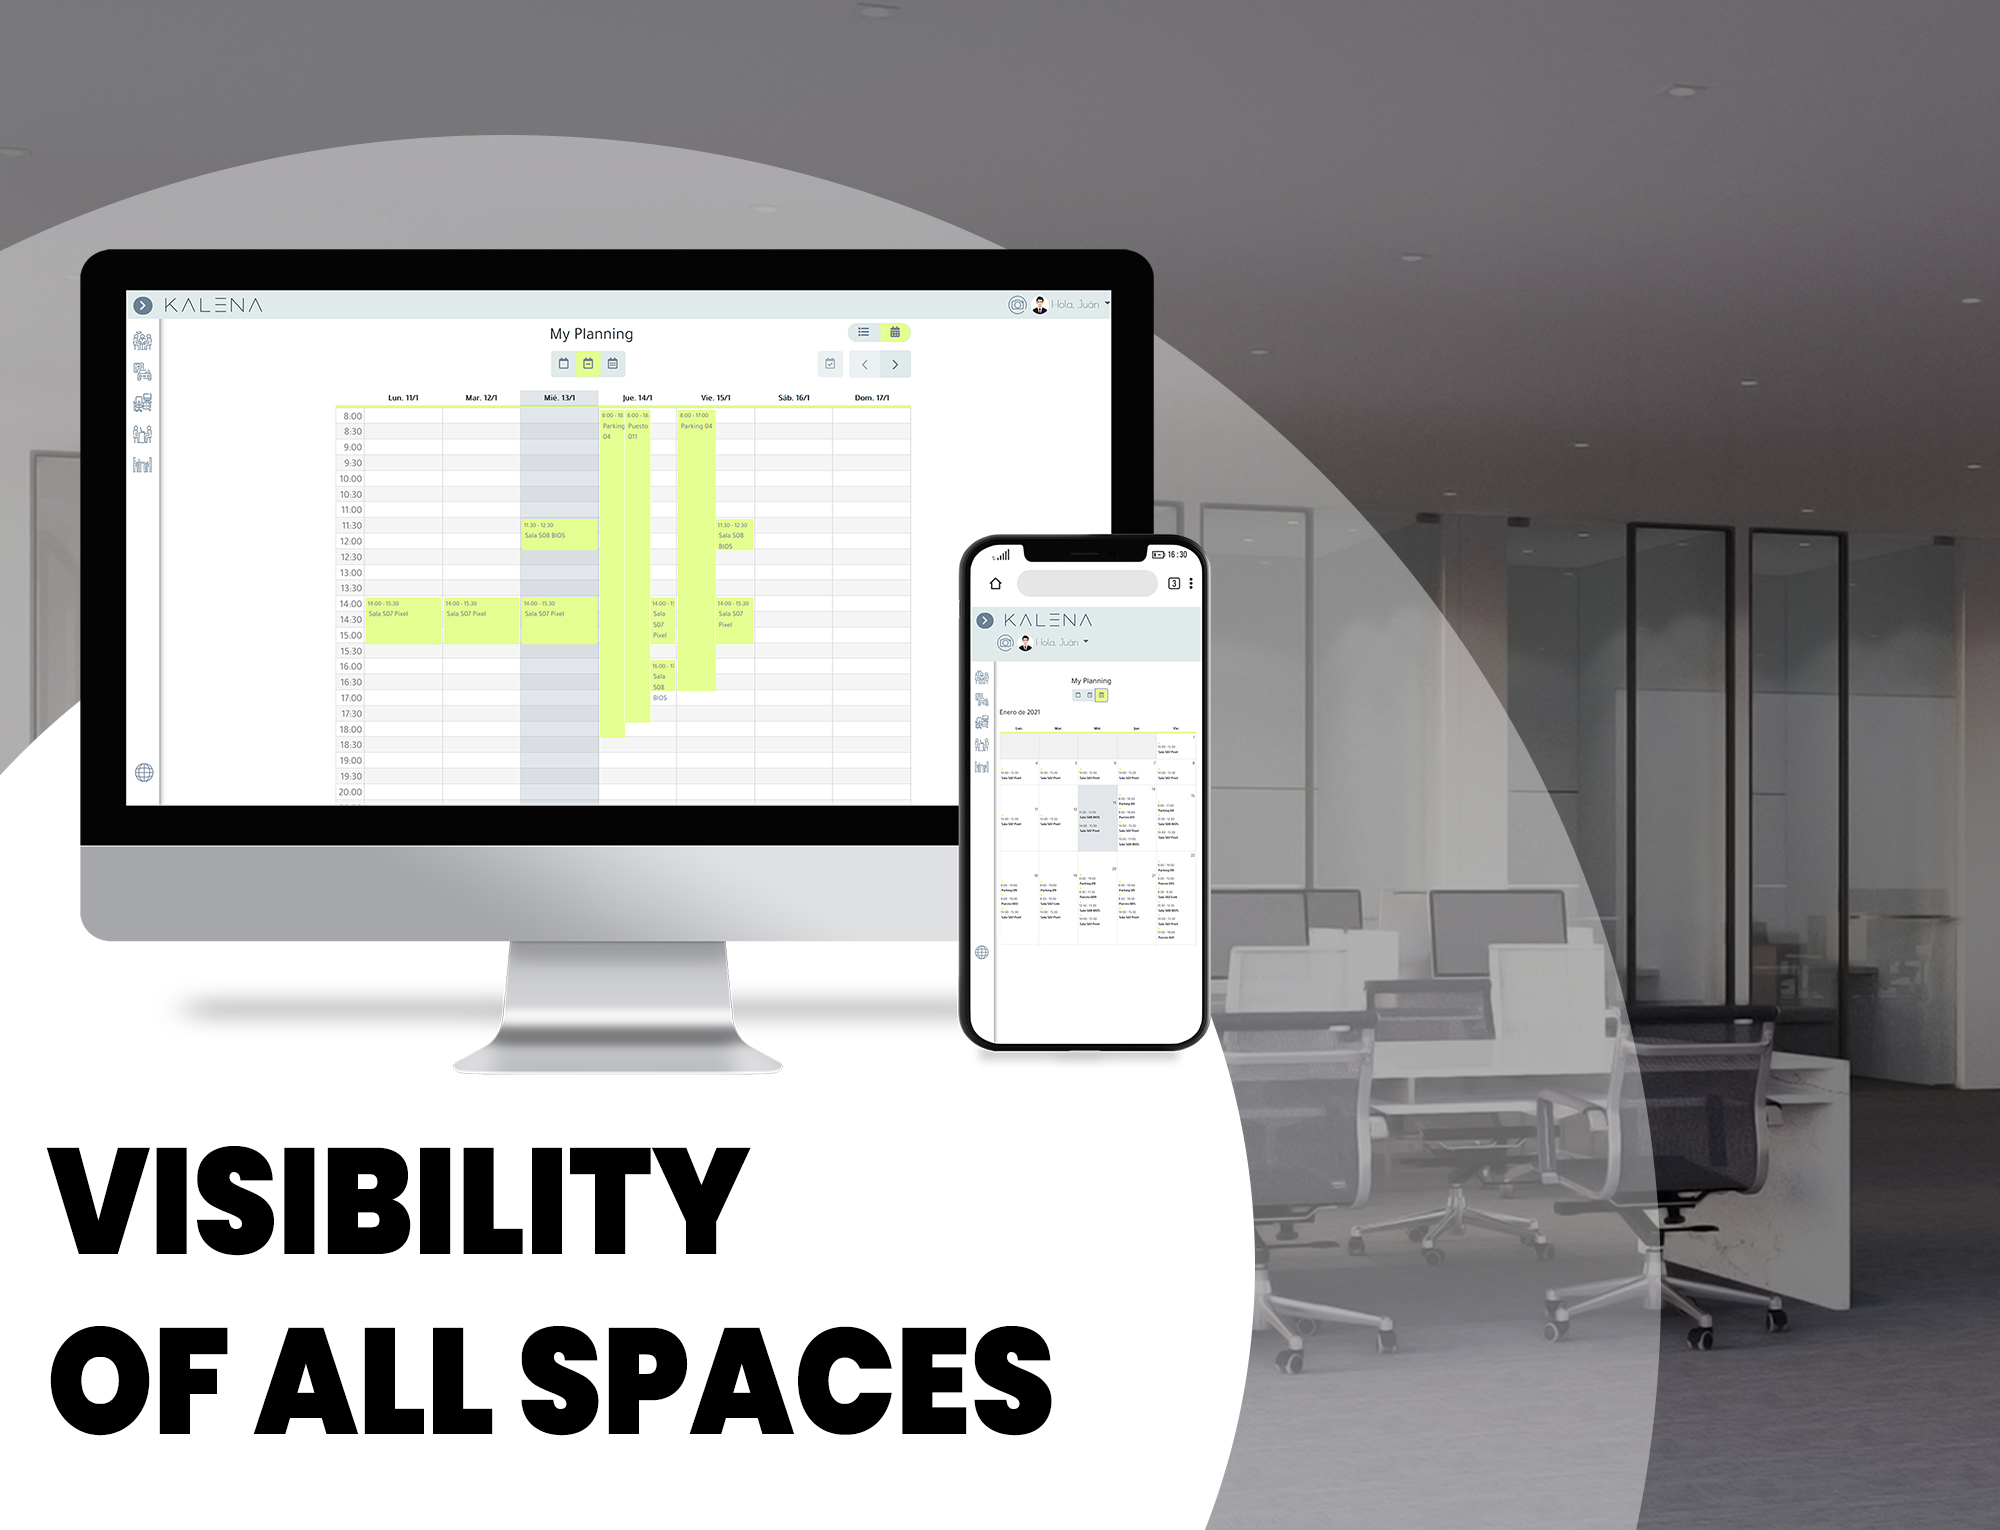 One of the main advantages of Kalena spaces is that you have visibility of all spaces at once, while with other calendar solutions the view is limited to 10 calendars or less.